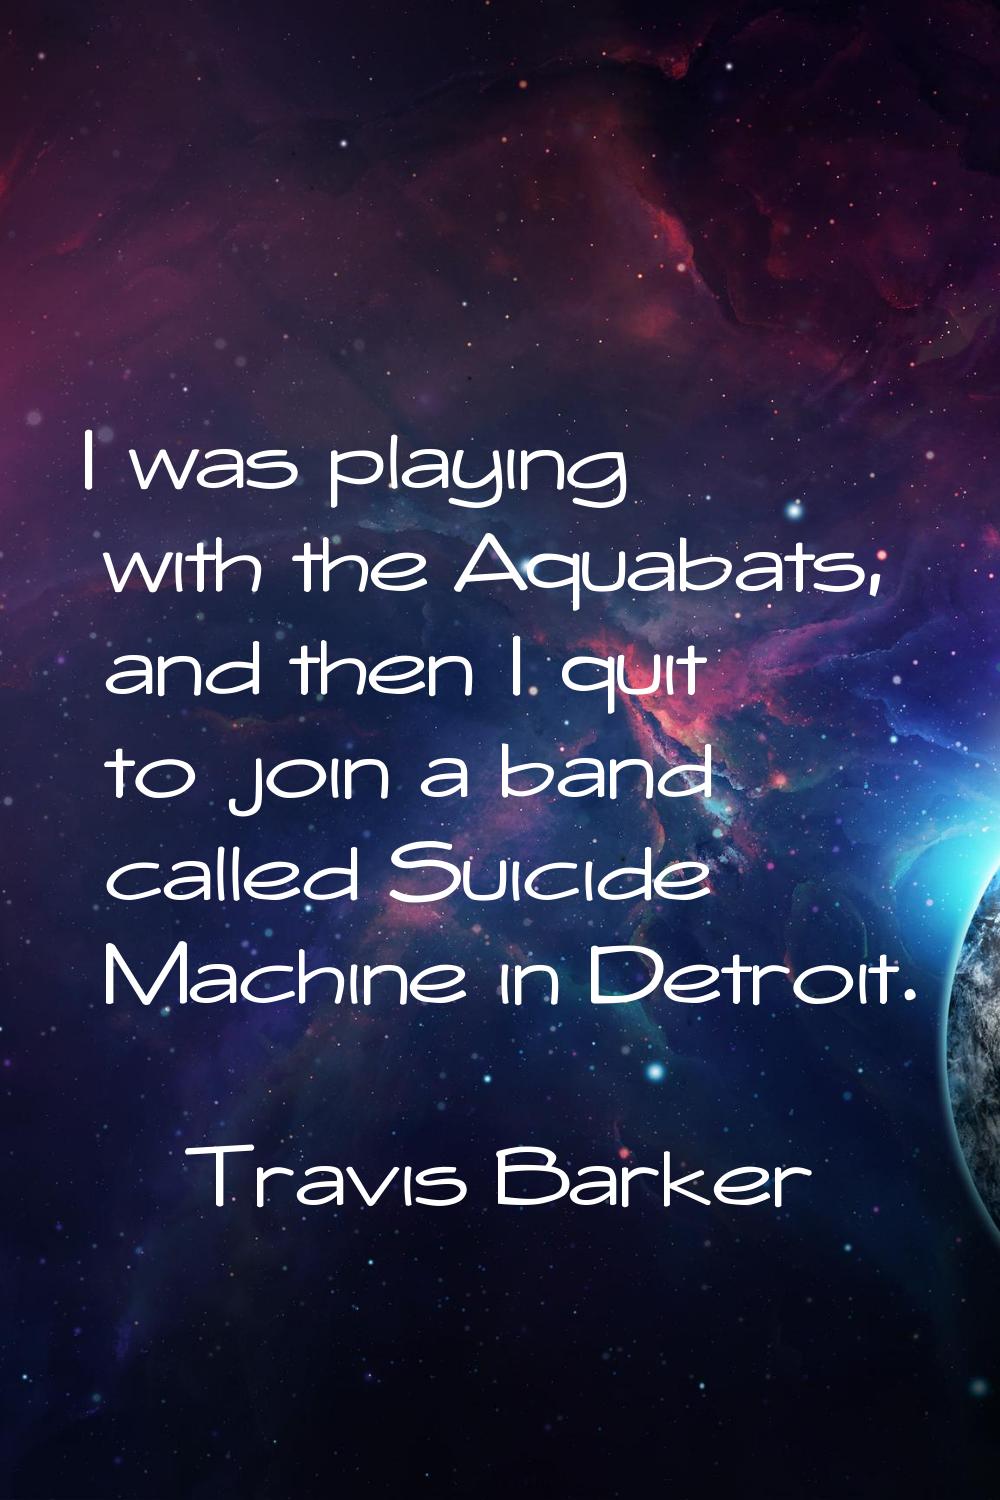 I was playing with the Aquabats, and then I quit to join a band called Suicide Machine in Detroit.